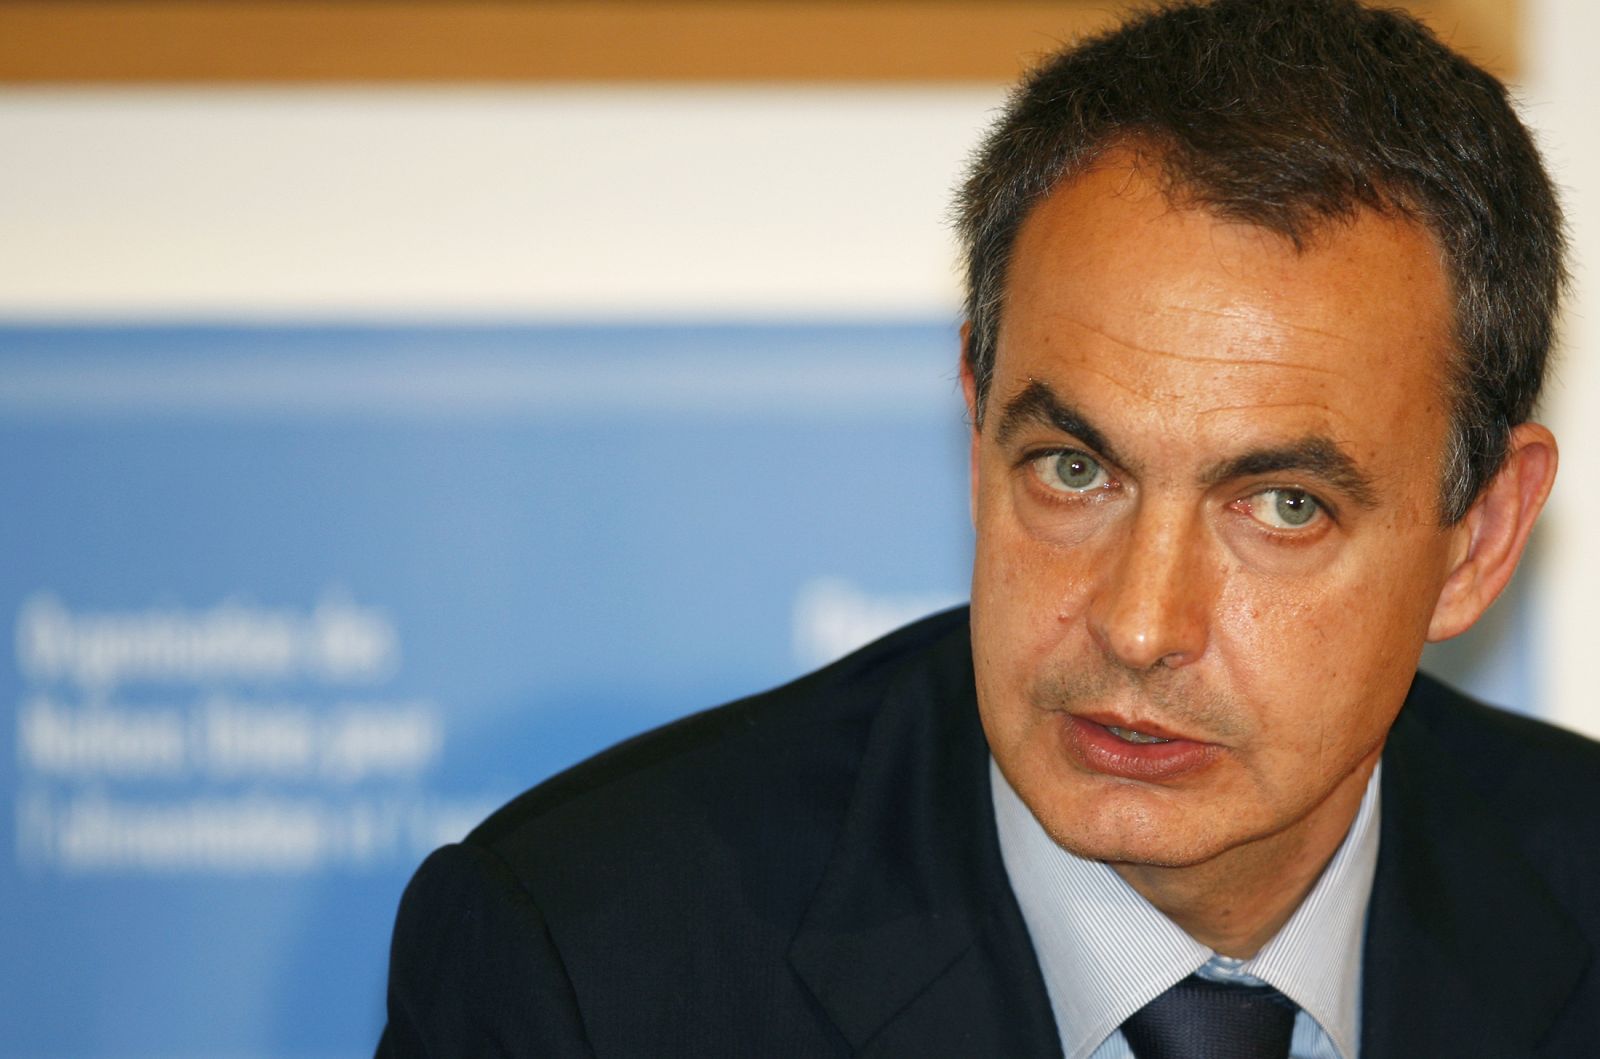 Spain's PM Zapatero speaks during a U.N. crisis summit on rising food prices at the FAO in Rome